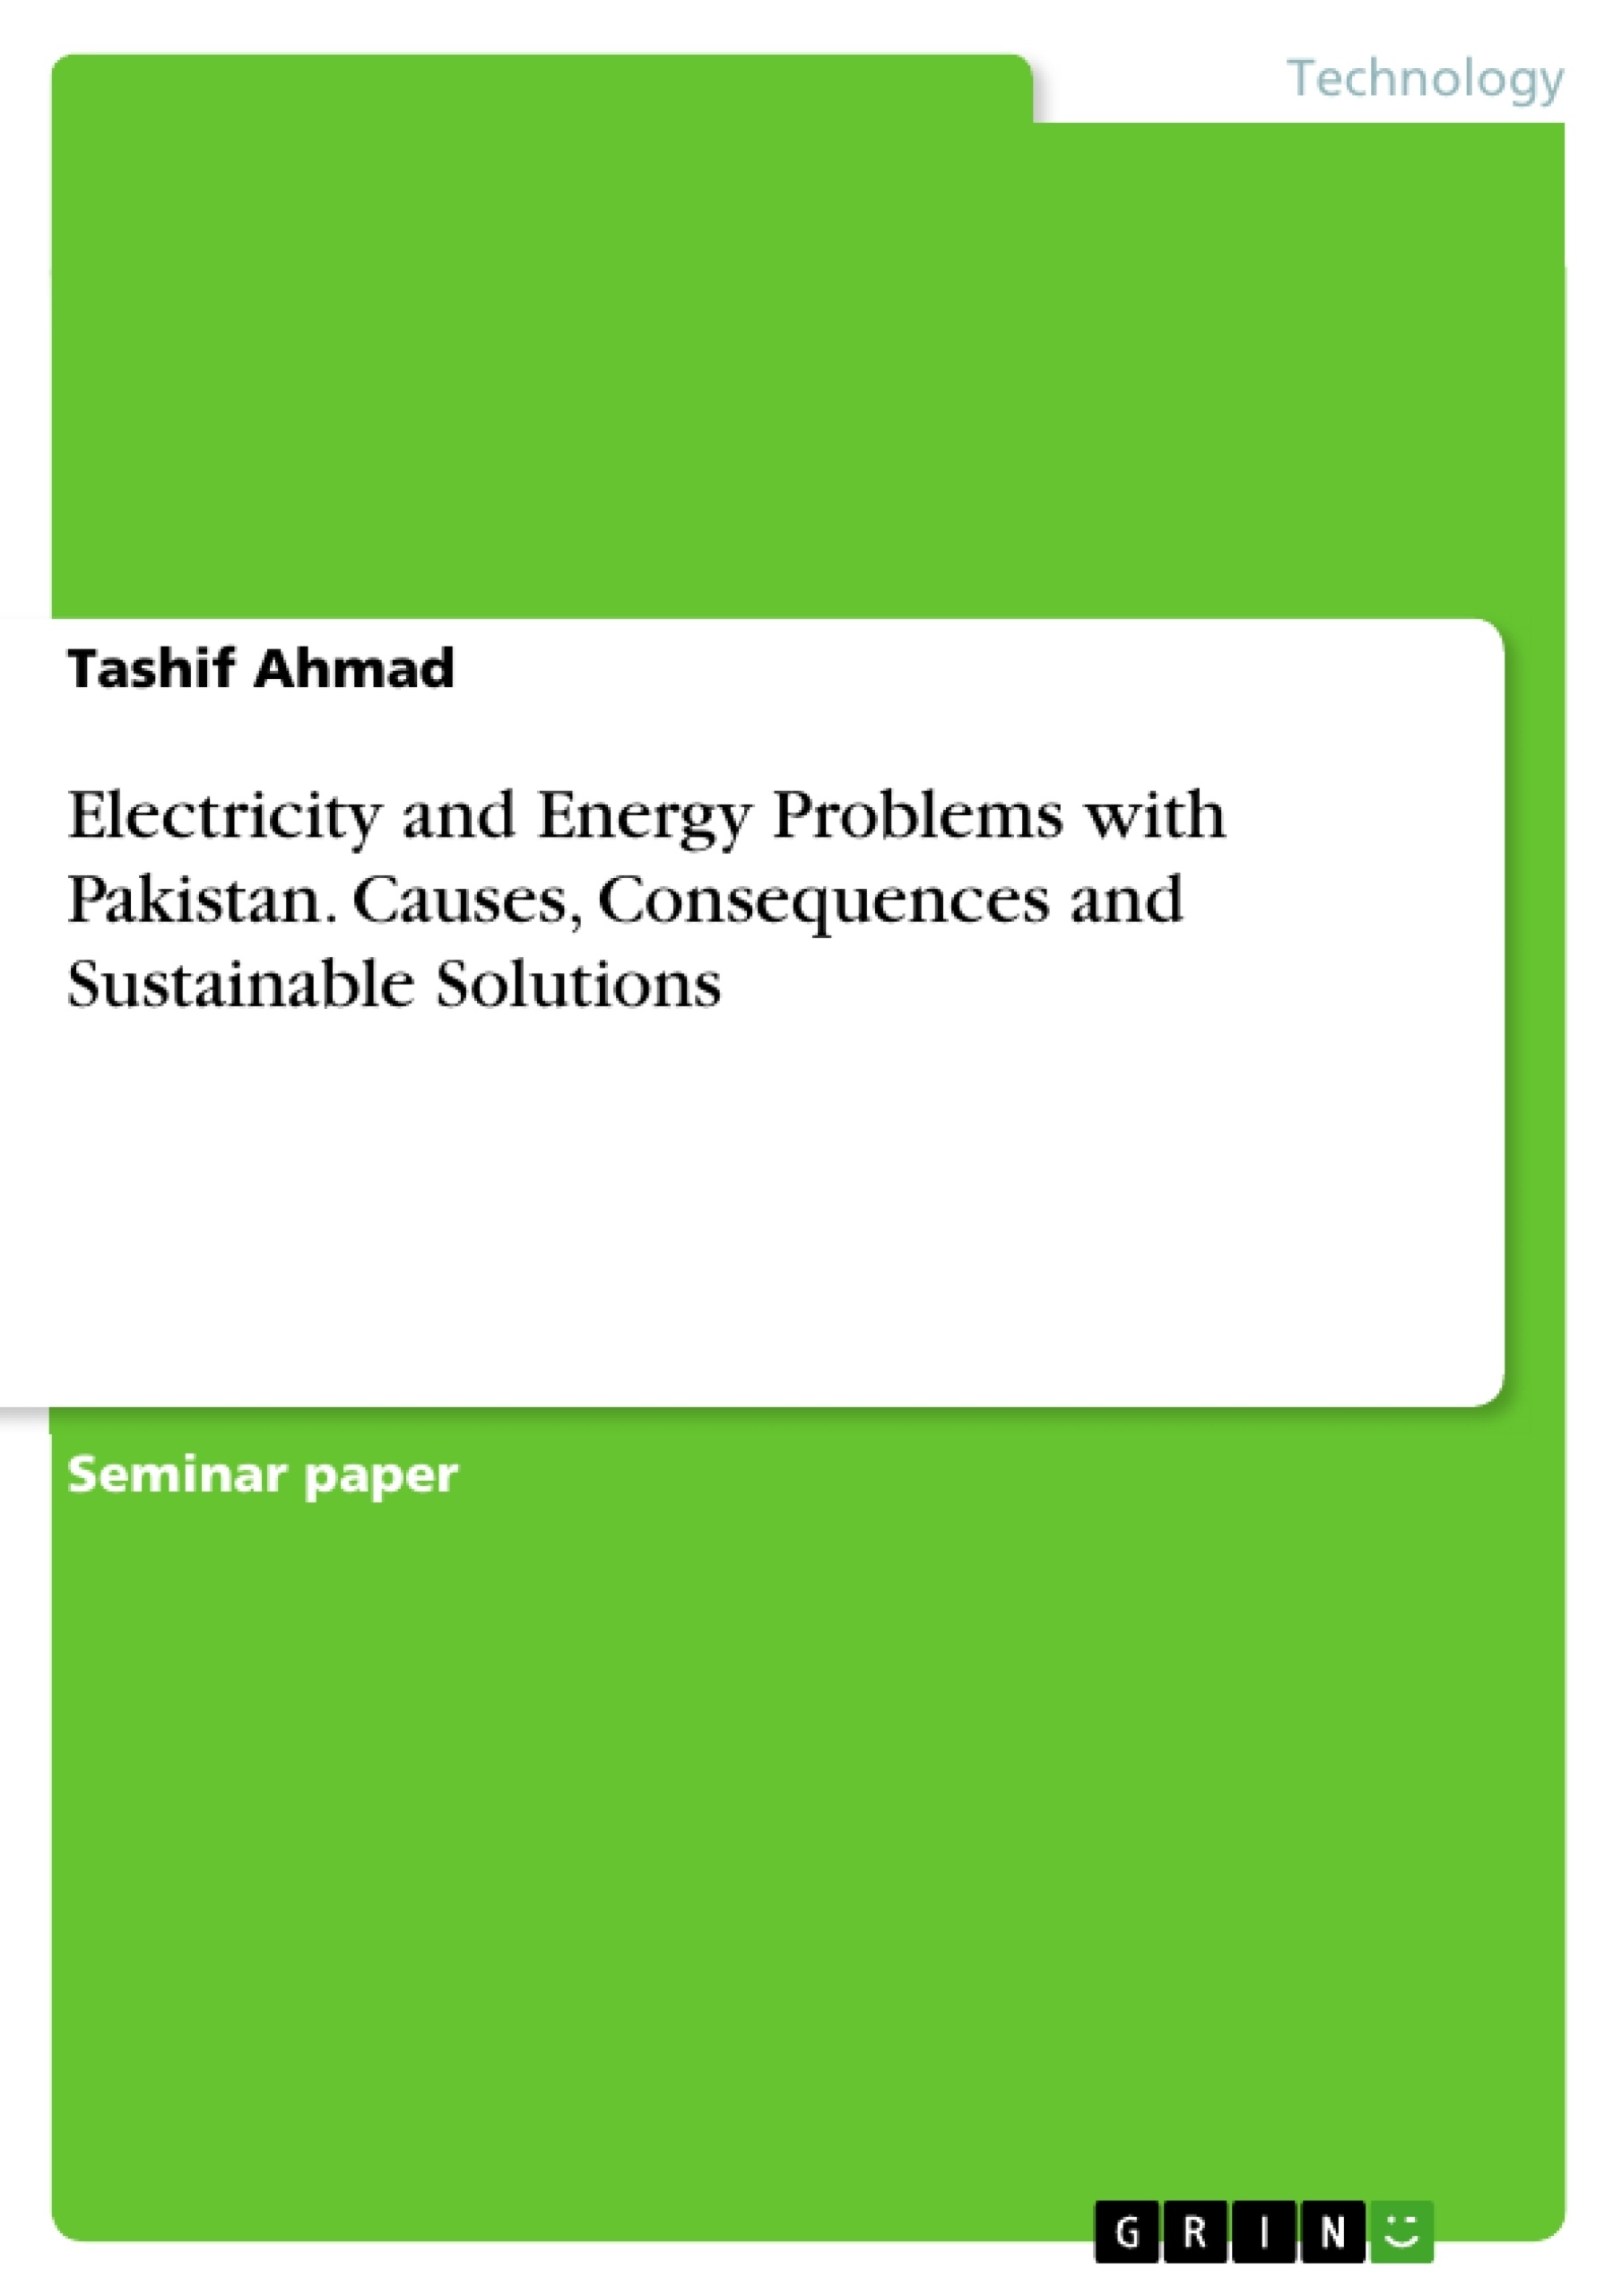 An essay on energy crisis in pakistan